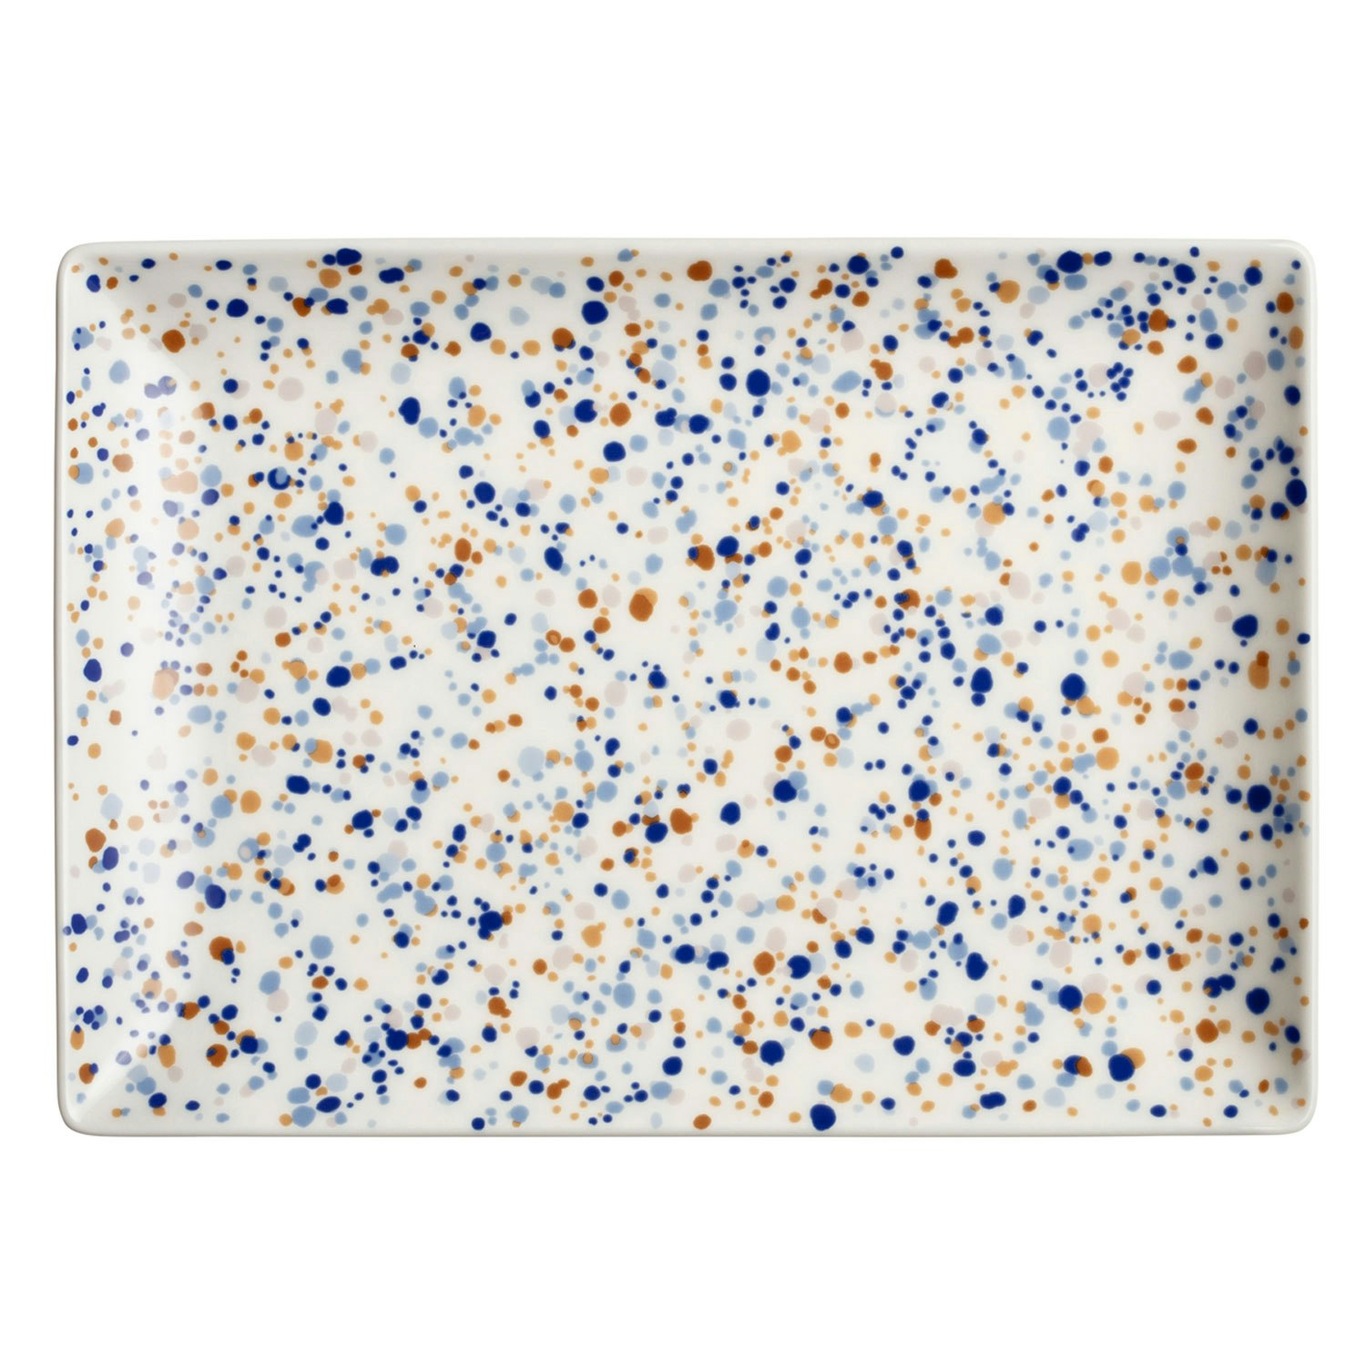 Oiva Toikka Collection Helle Plate Blue / Brown, A4 21x29 cm